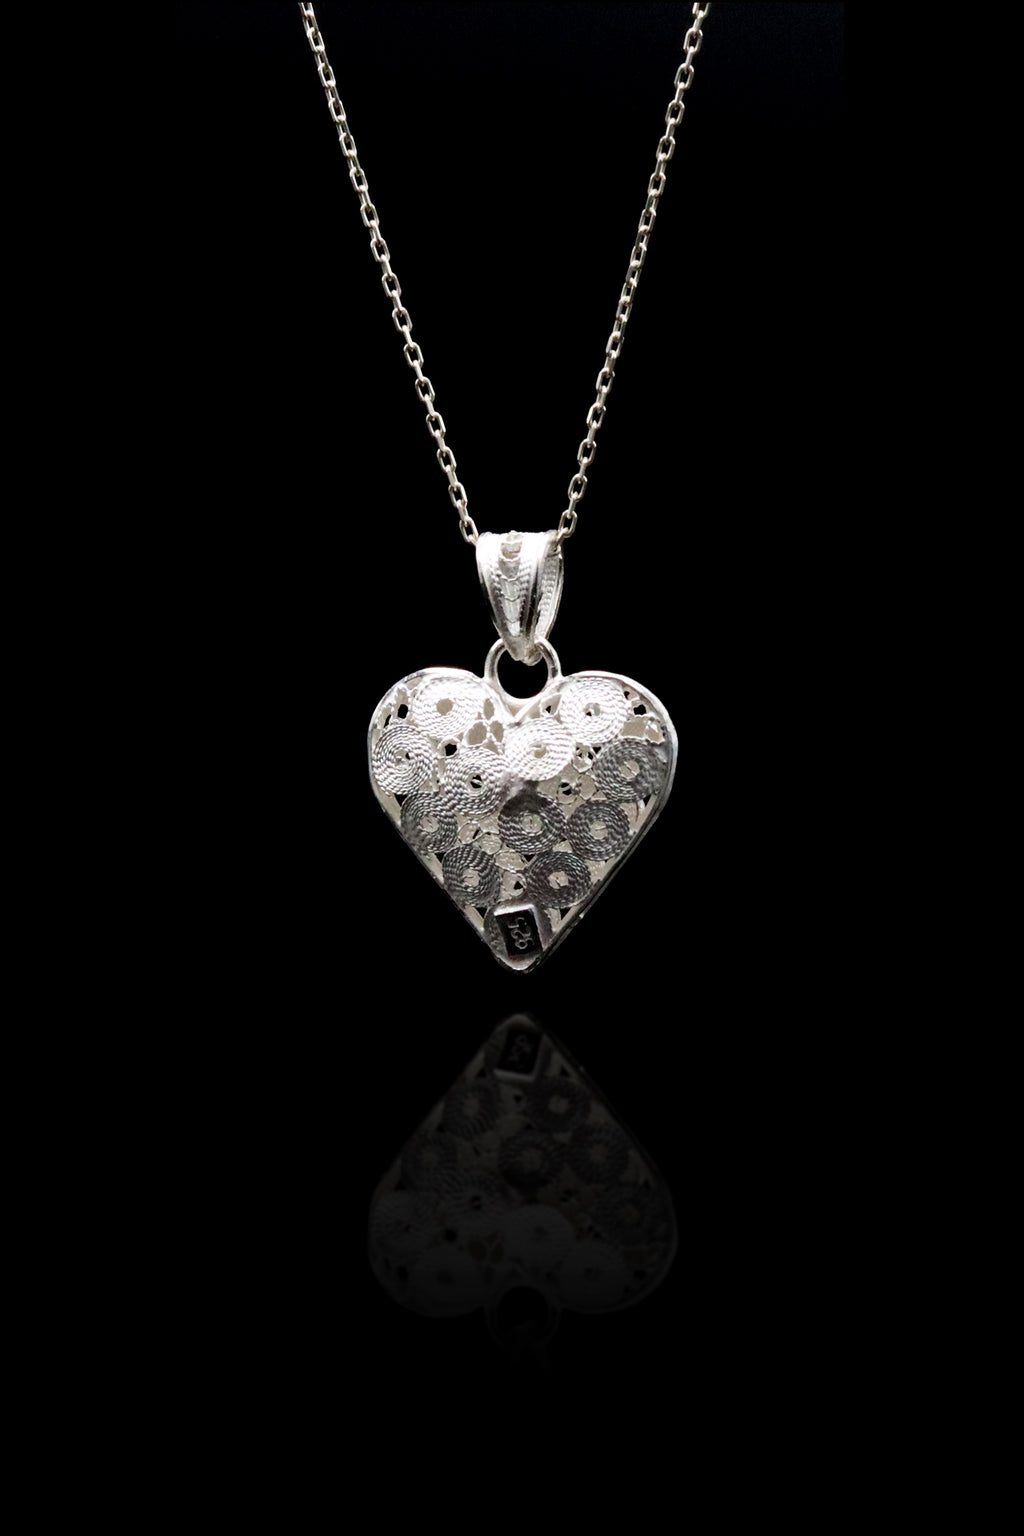 Heart Model Filigree Sterling Silver Necklace (NG201019568)